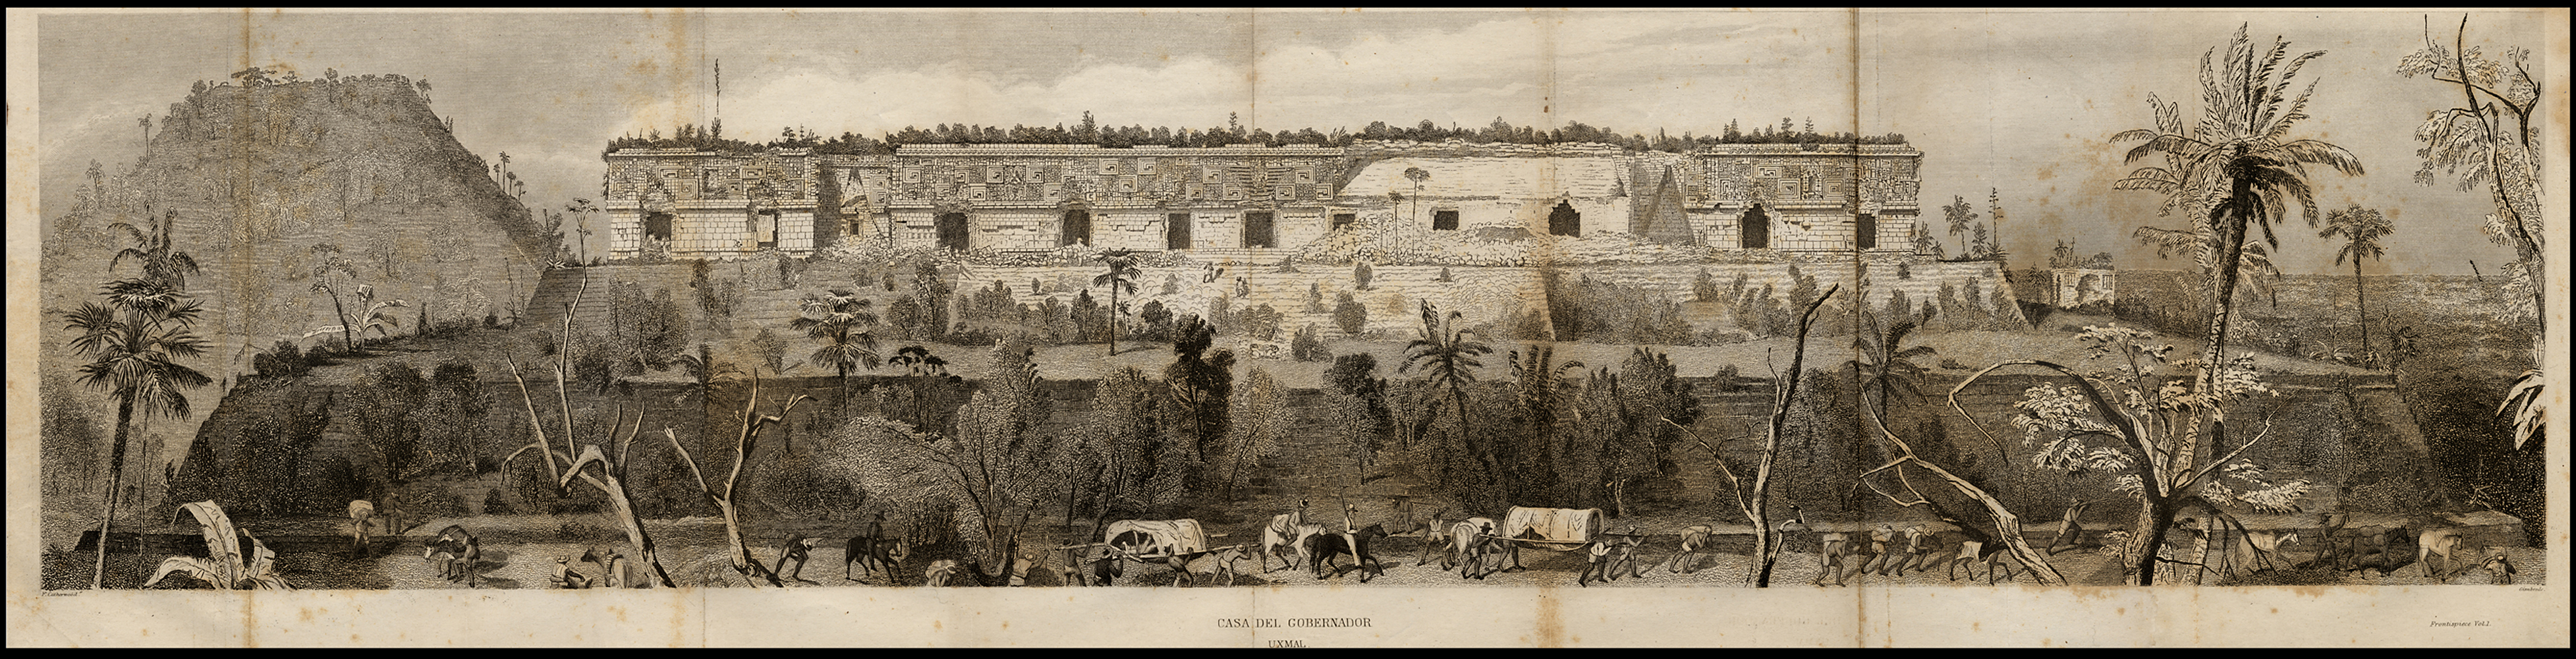 Uxmal, main facade of the Governor's Palace in 1842